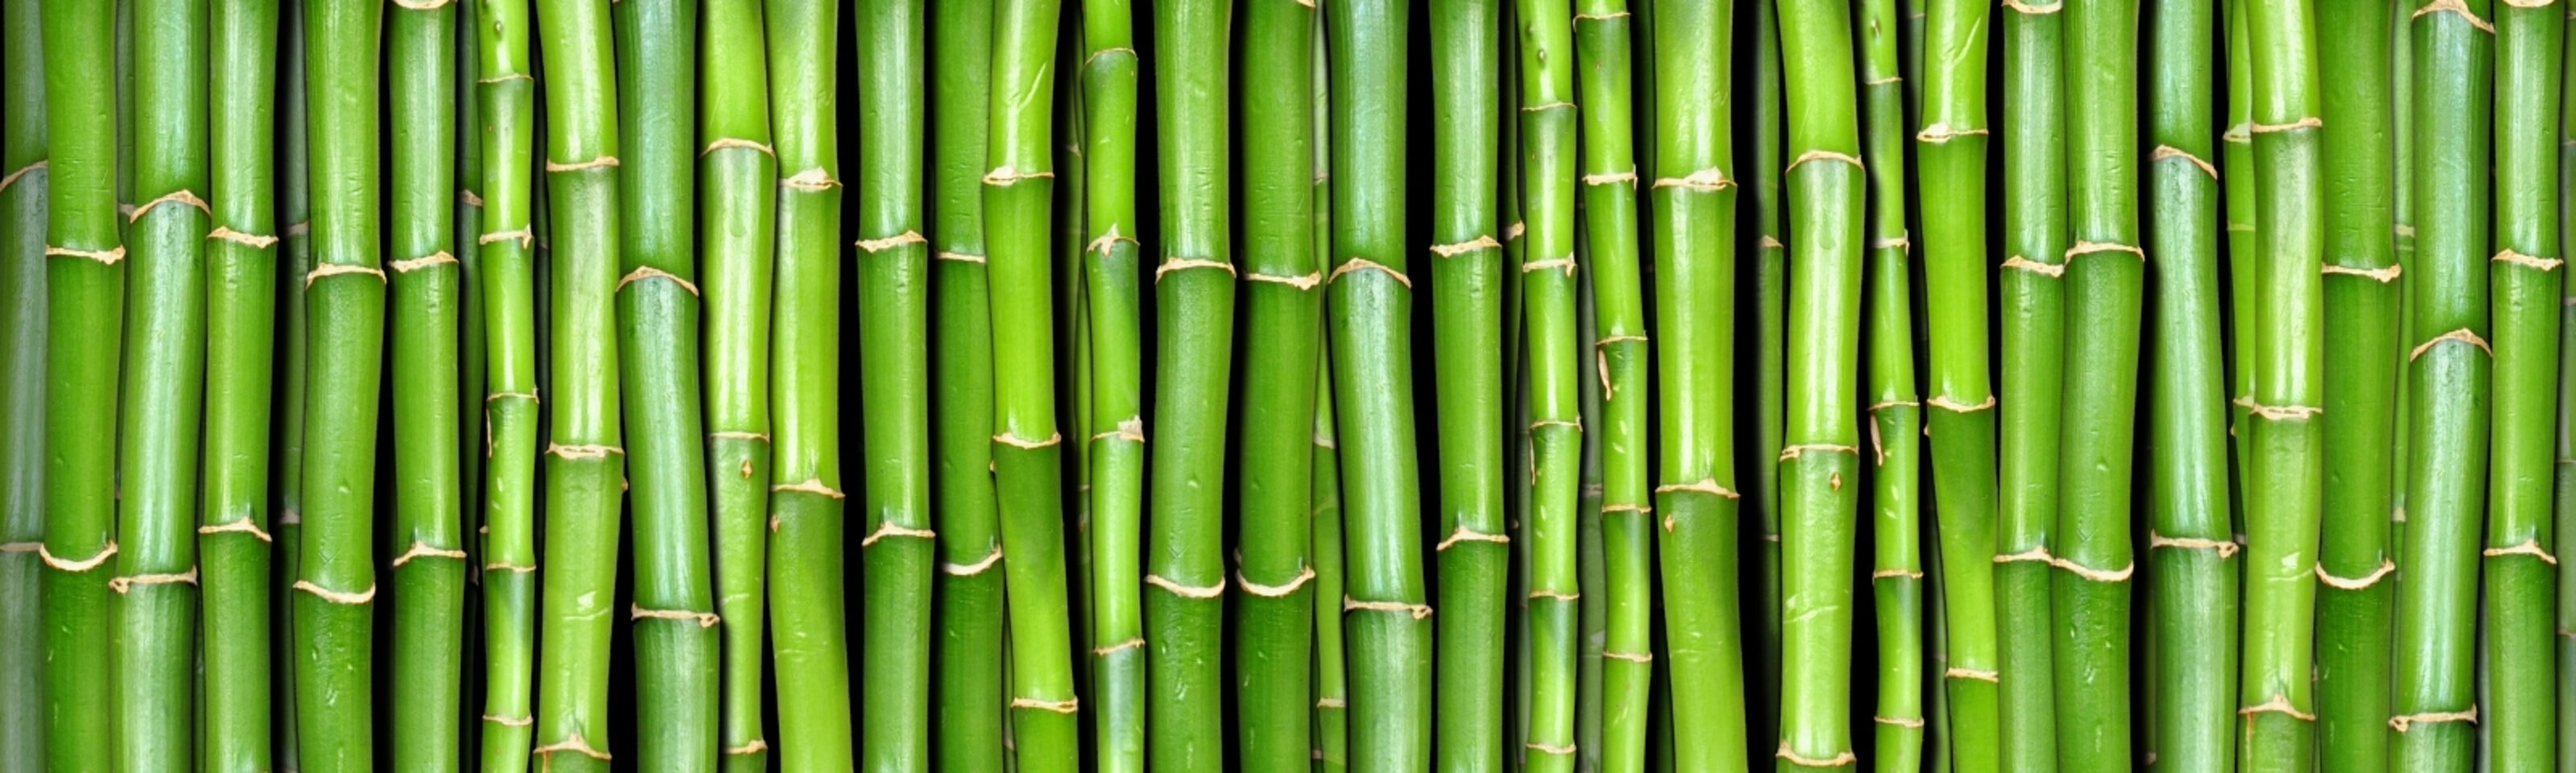 The Benefits of Bamboo Fabric: Why It's Good for You and the Planet